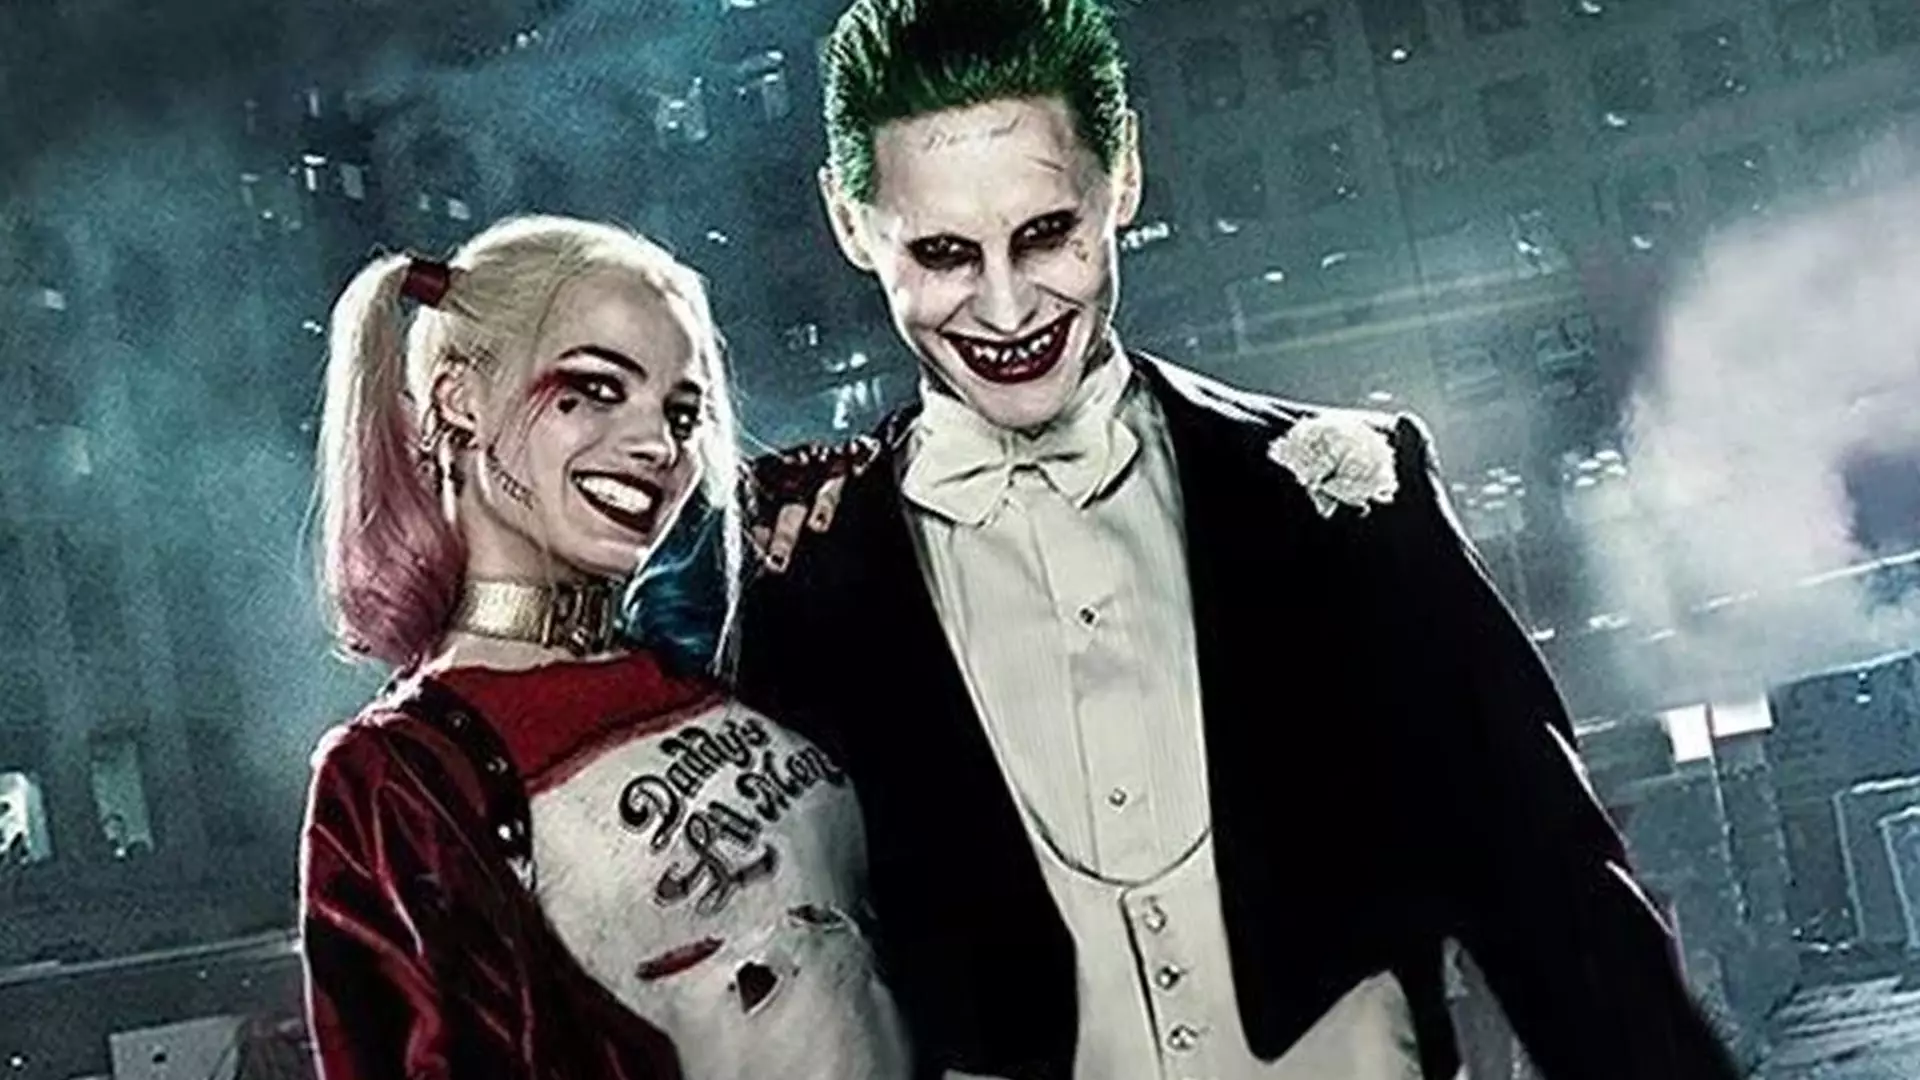 The Joker and Harley Quinn are a famous toxic couple (